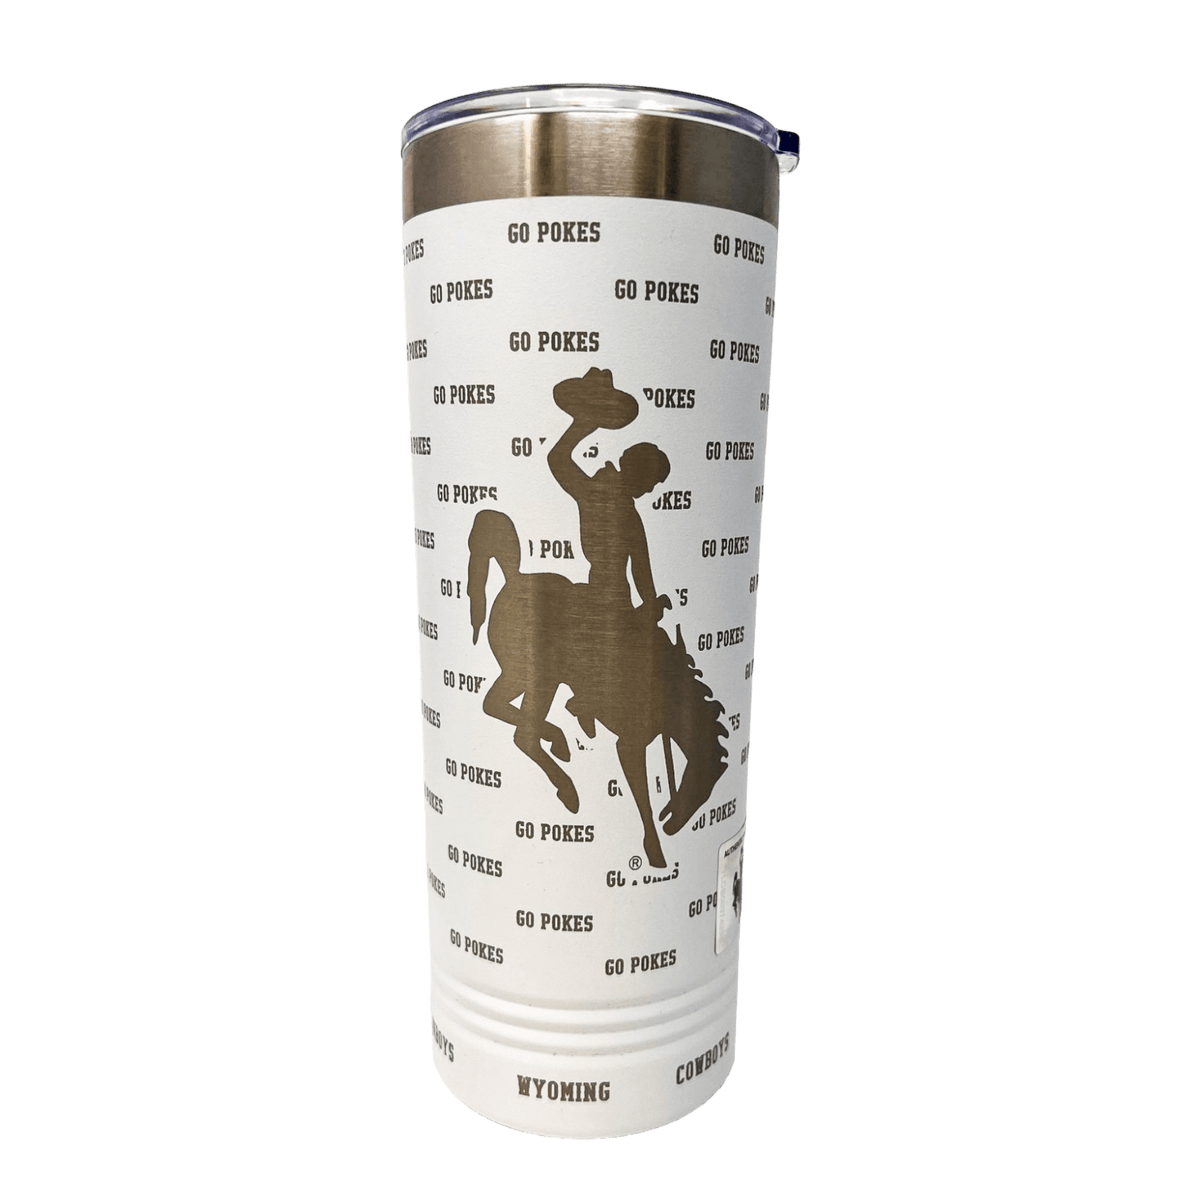 https://cdn.shopify.com/s/files/1/0606/5497/7184/products/wind-river-outpost-go-wyo-steamboat-tumbler_1200x.png?v=1690330577